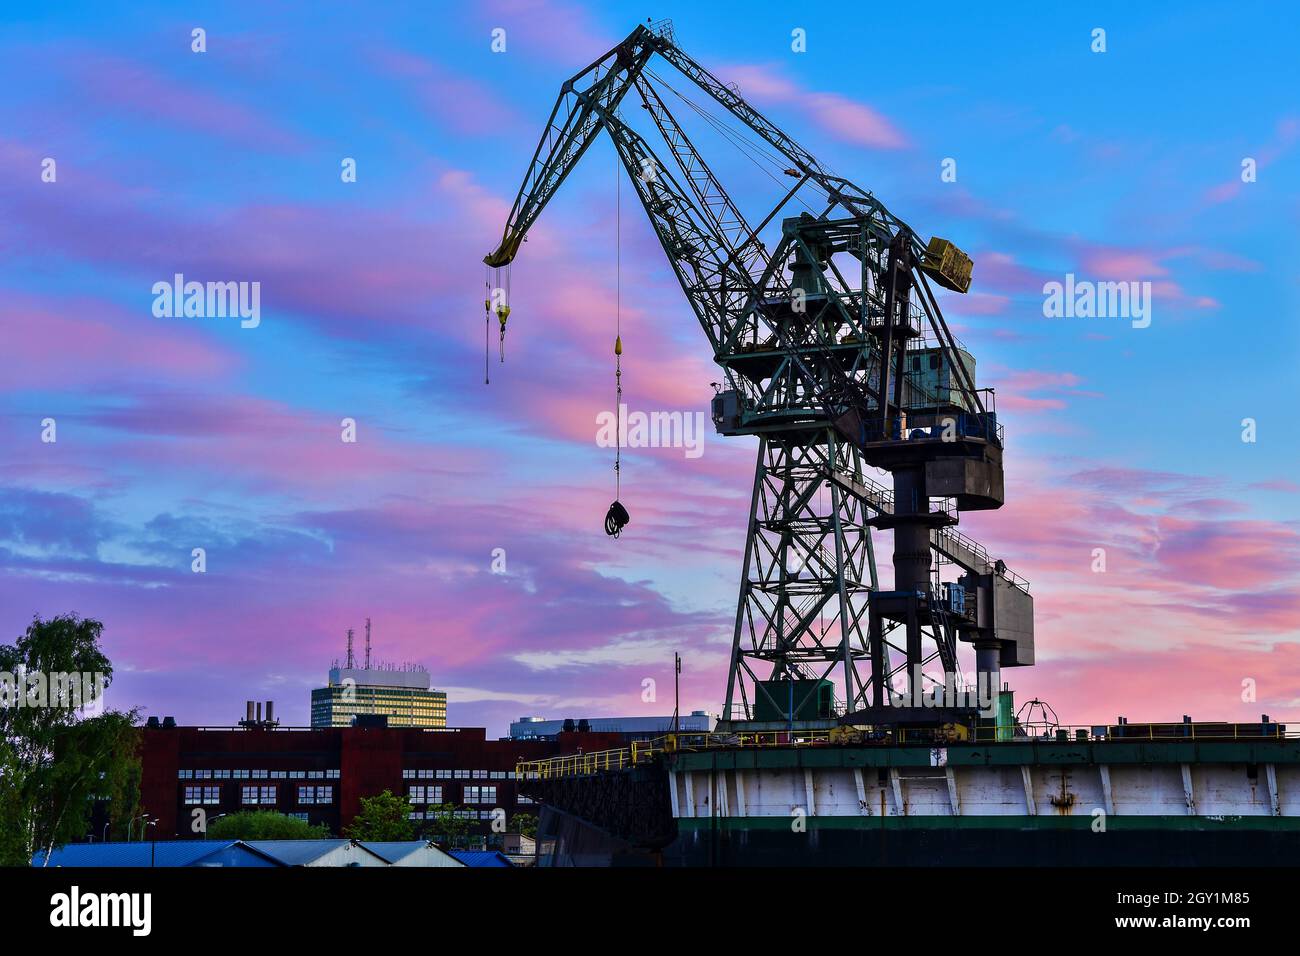 Beautiful sunset and cranes in a shipyard in Gdansk, Poland Stock Photo